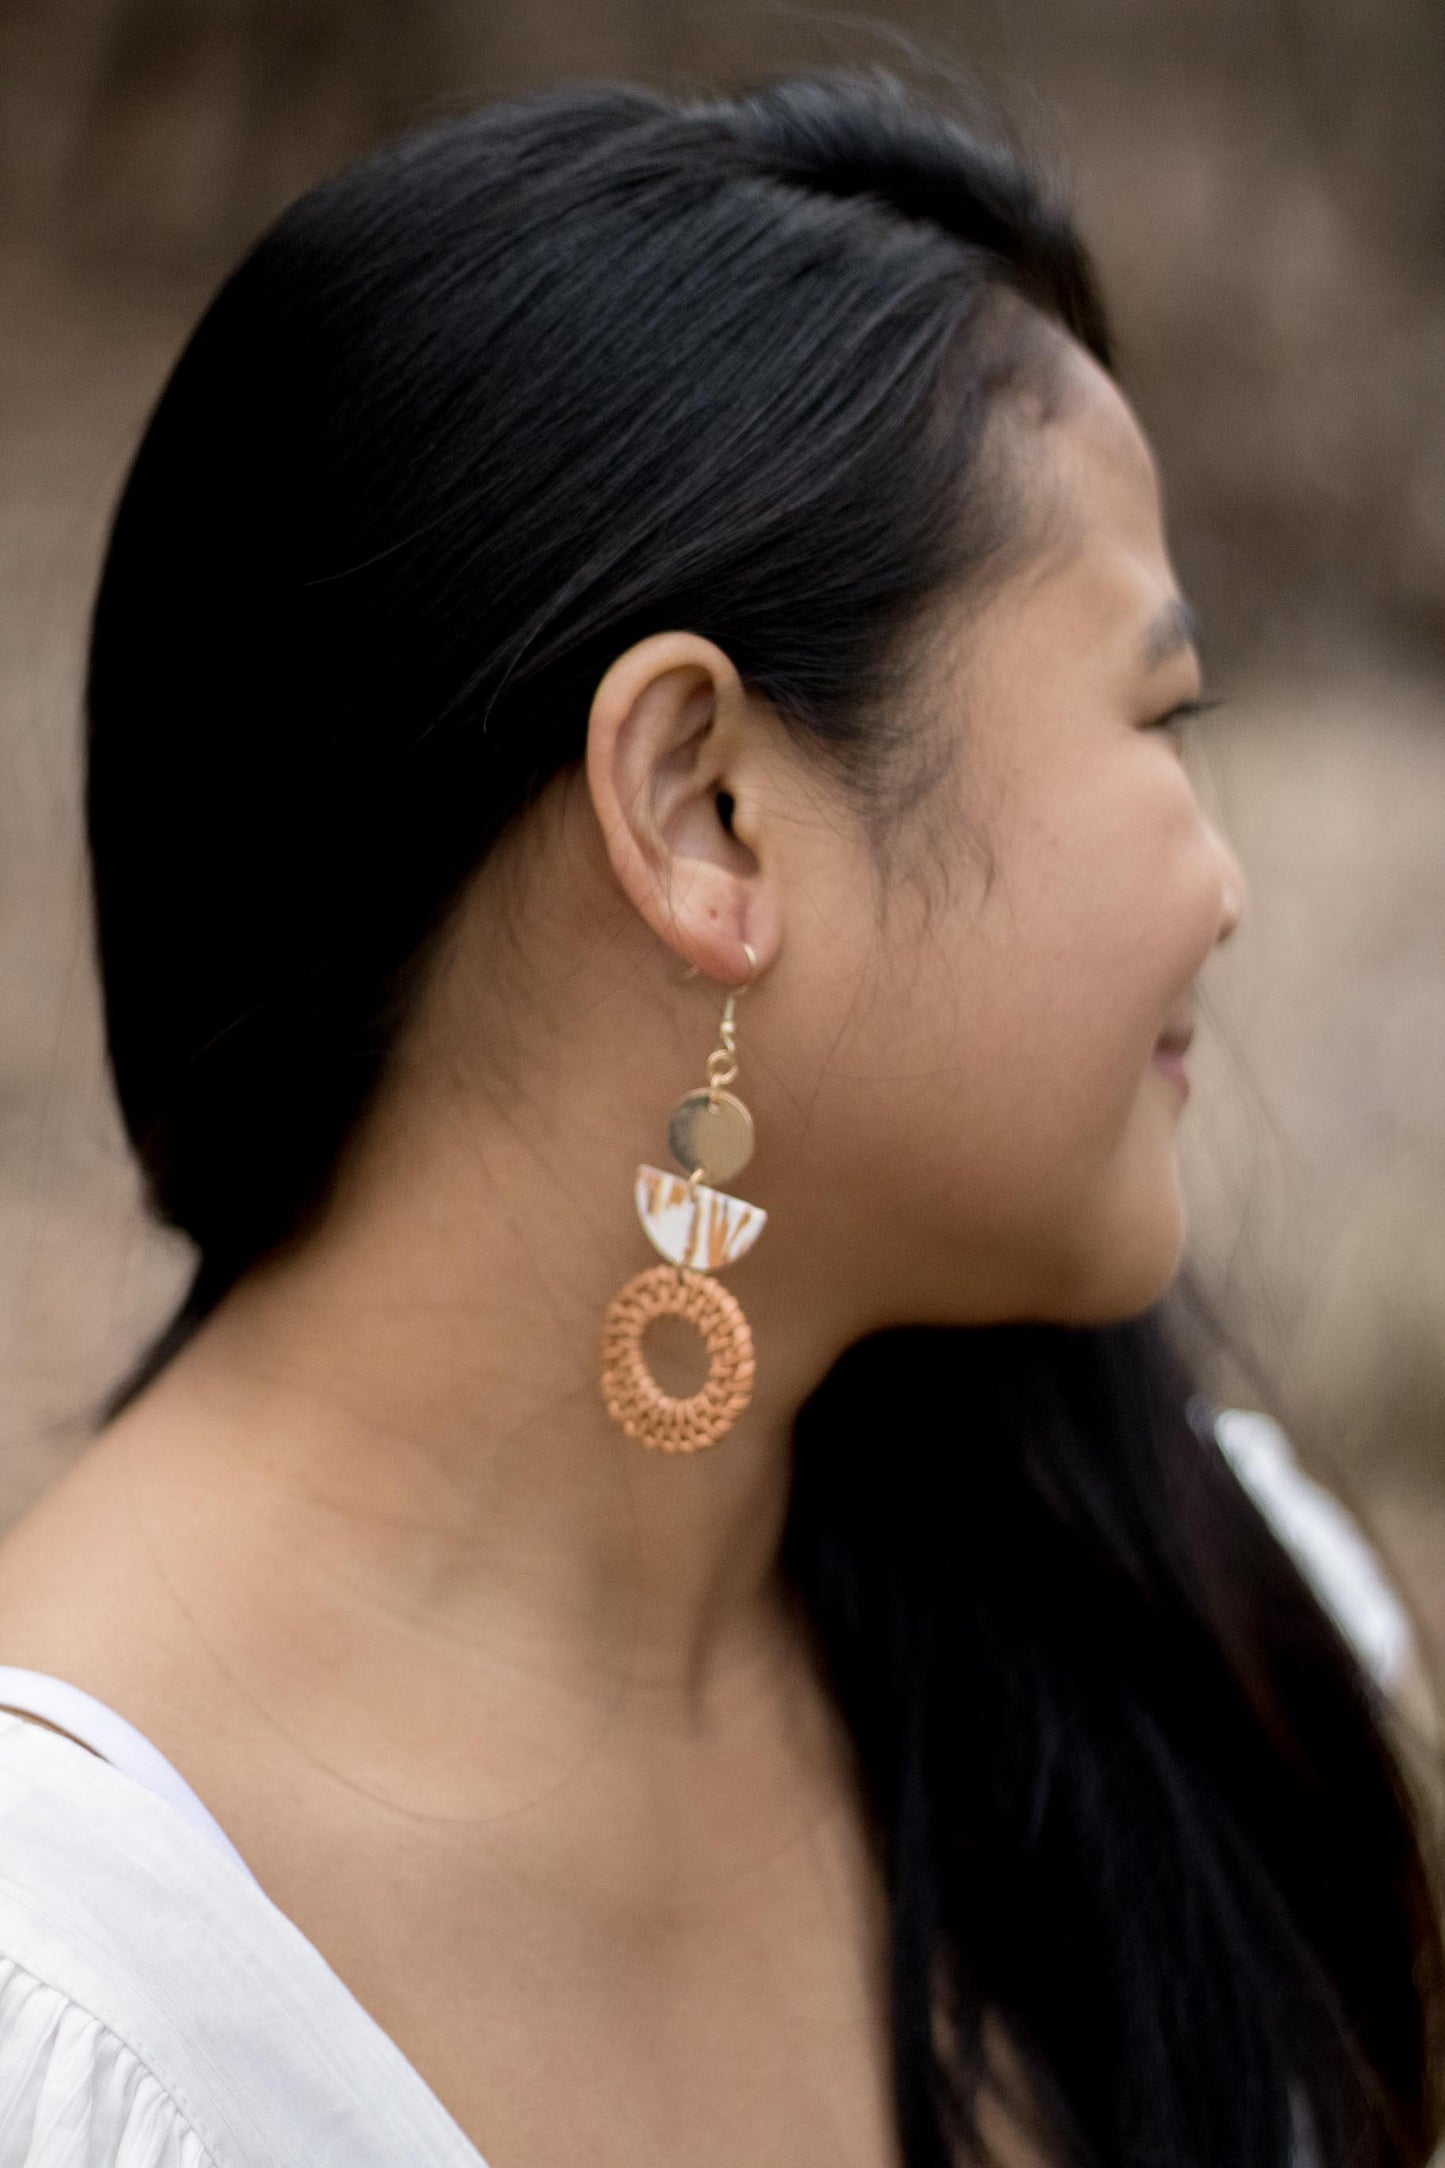 Mila - Wicker Charm and Tan Marble Polymer Clay Earrings